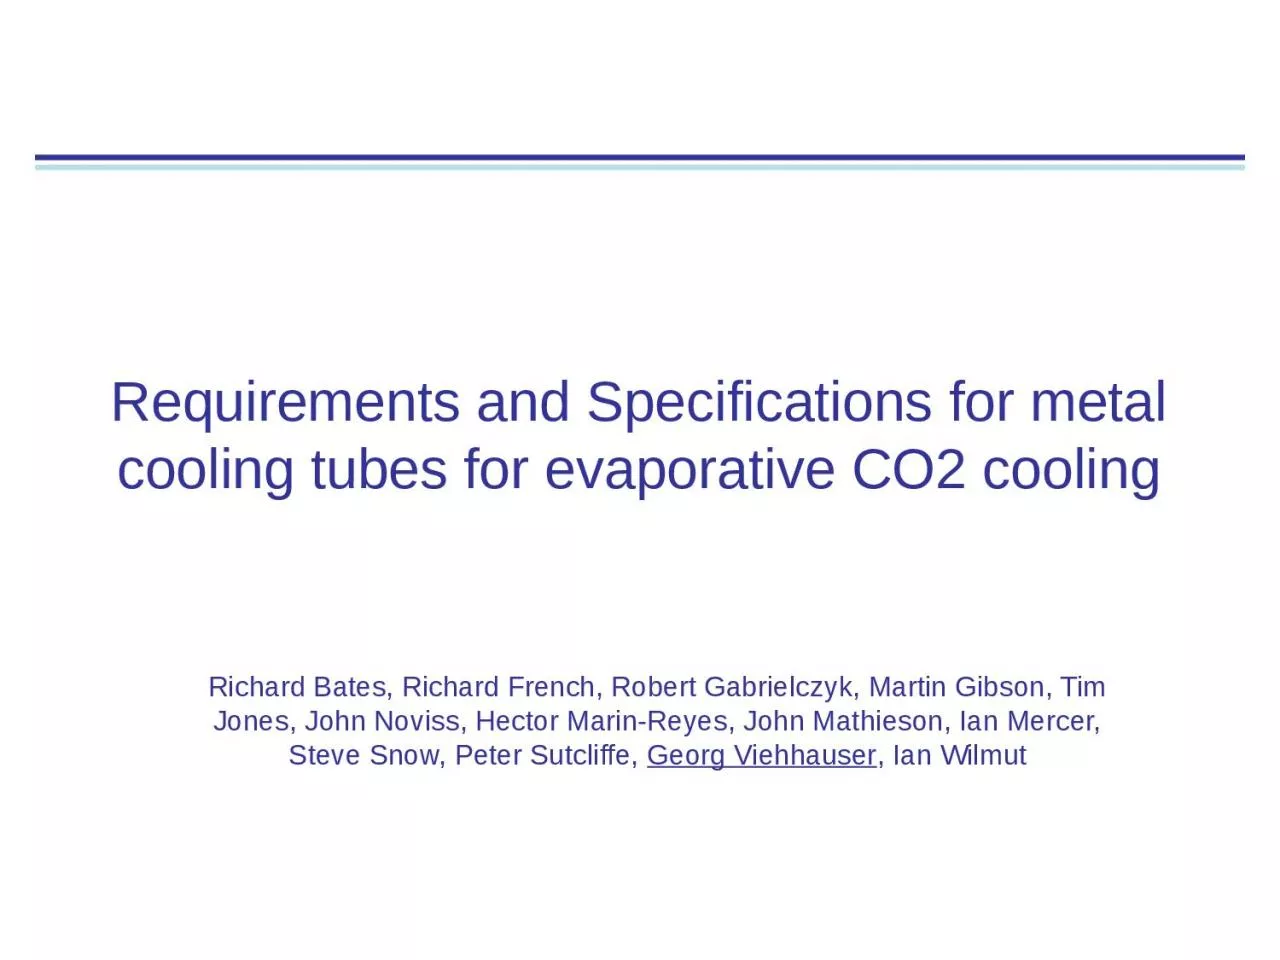 Requirements and Specifications for metal cooling tubes for evaporative CO2 cooling